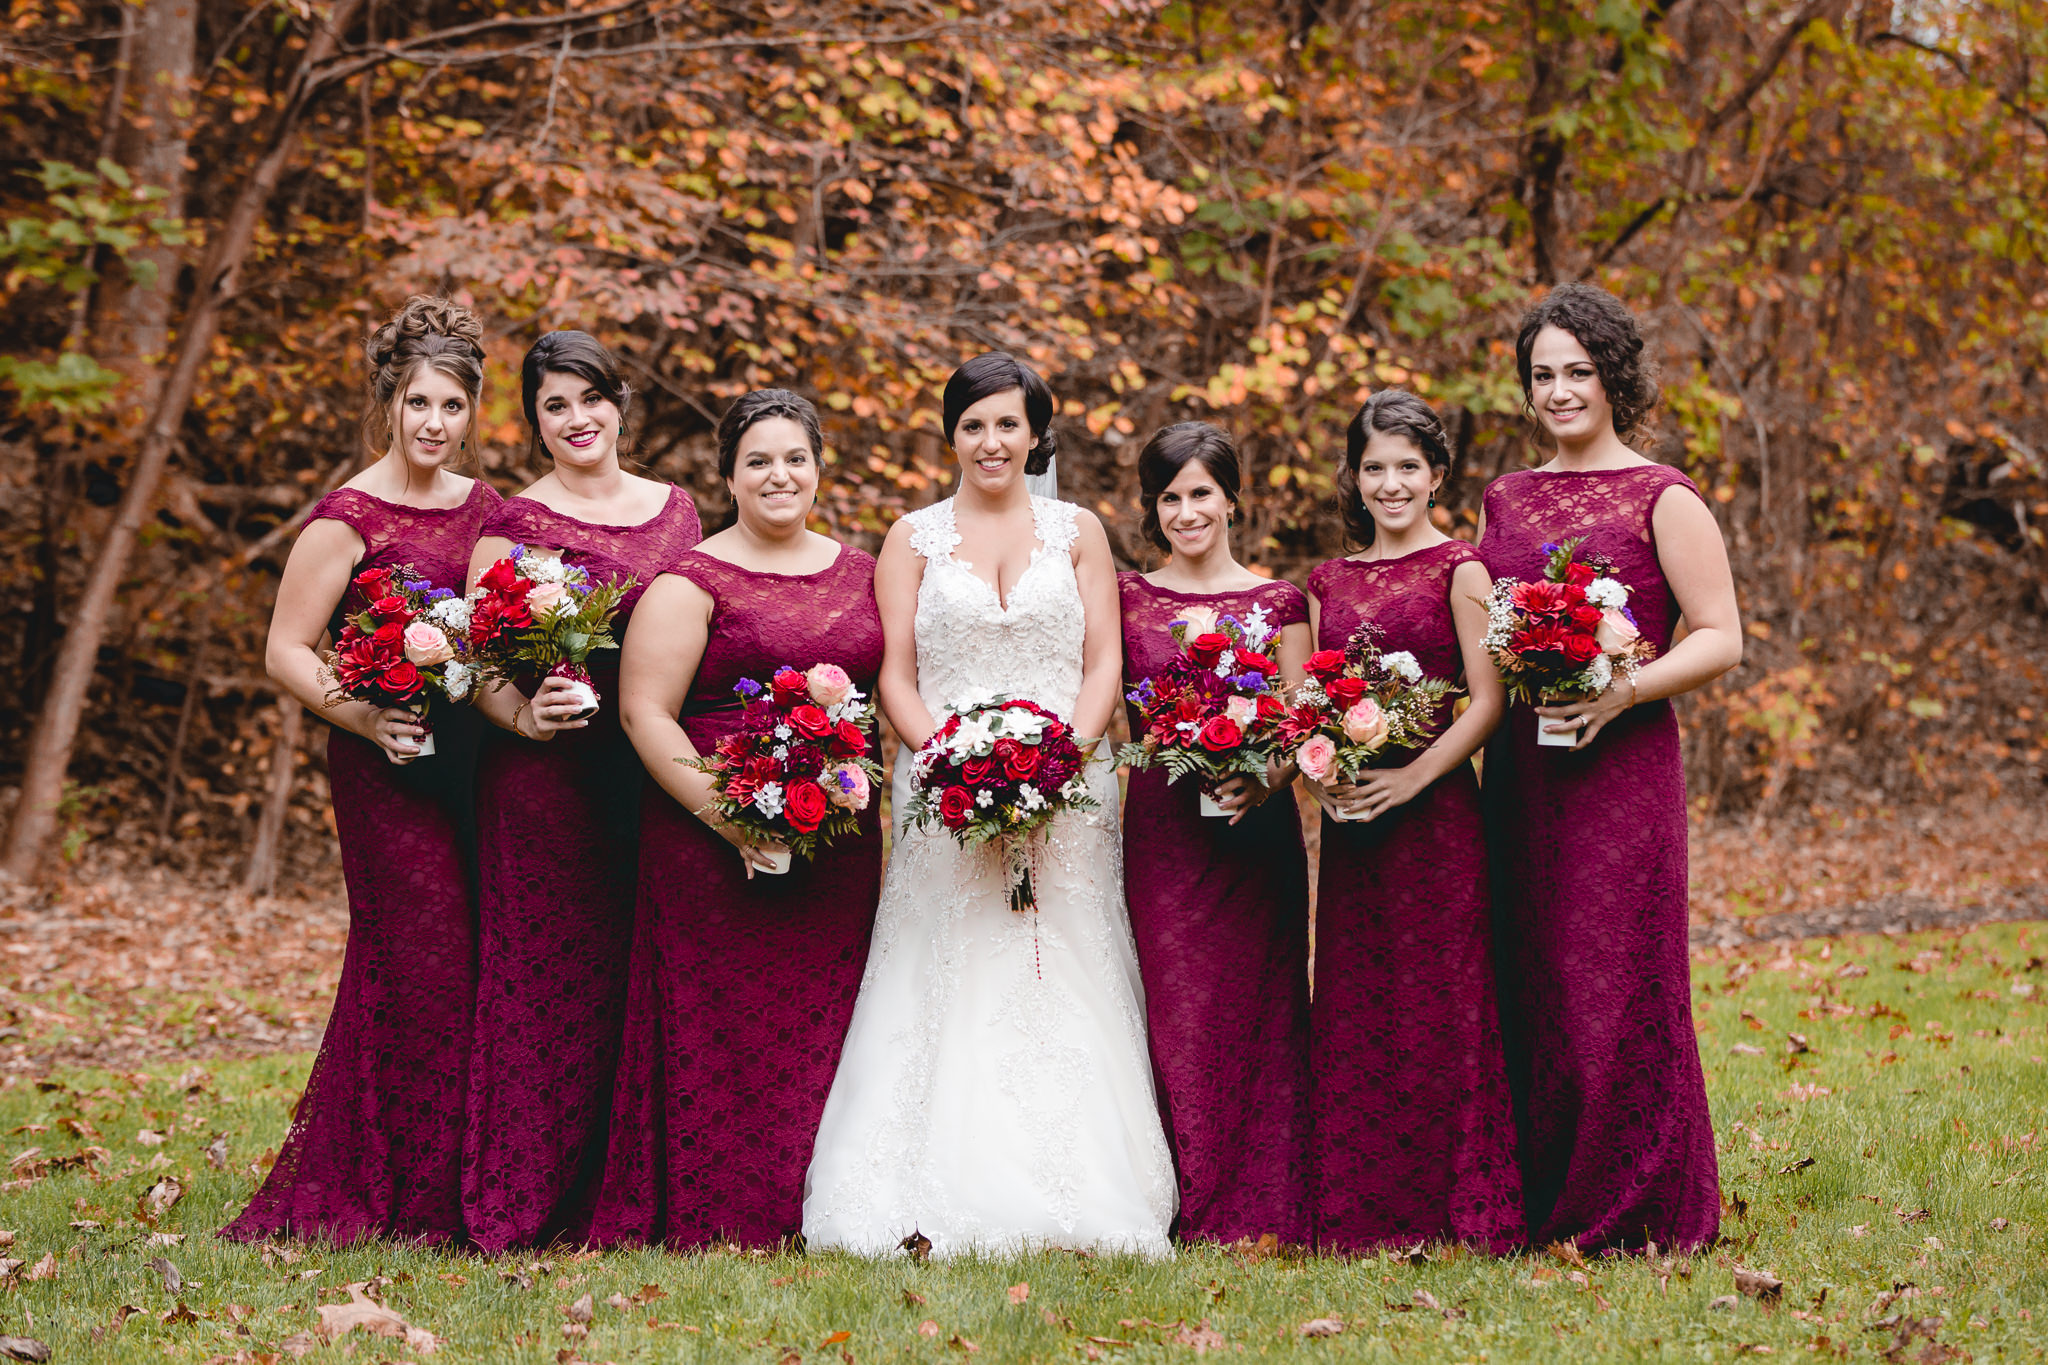 Bride & bridesmaids in wine colored dresses for a fall wedding in Moon Township